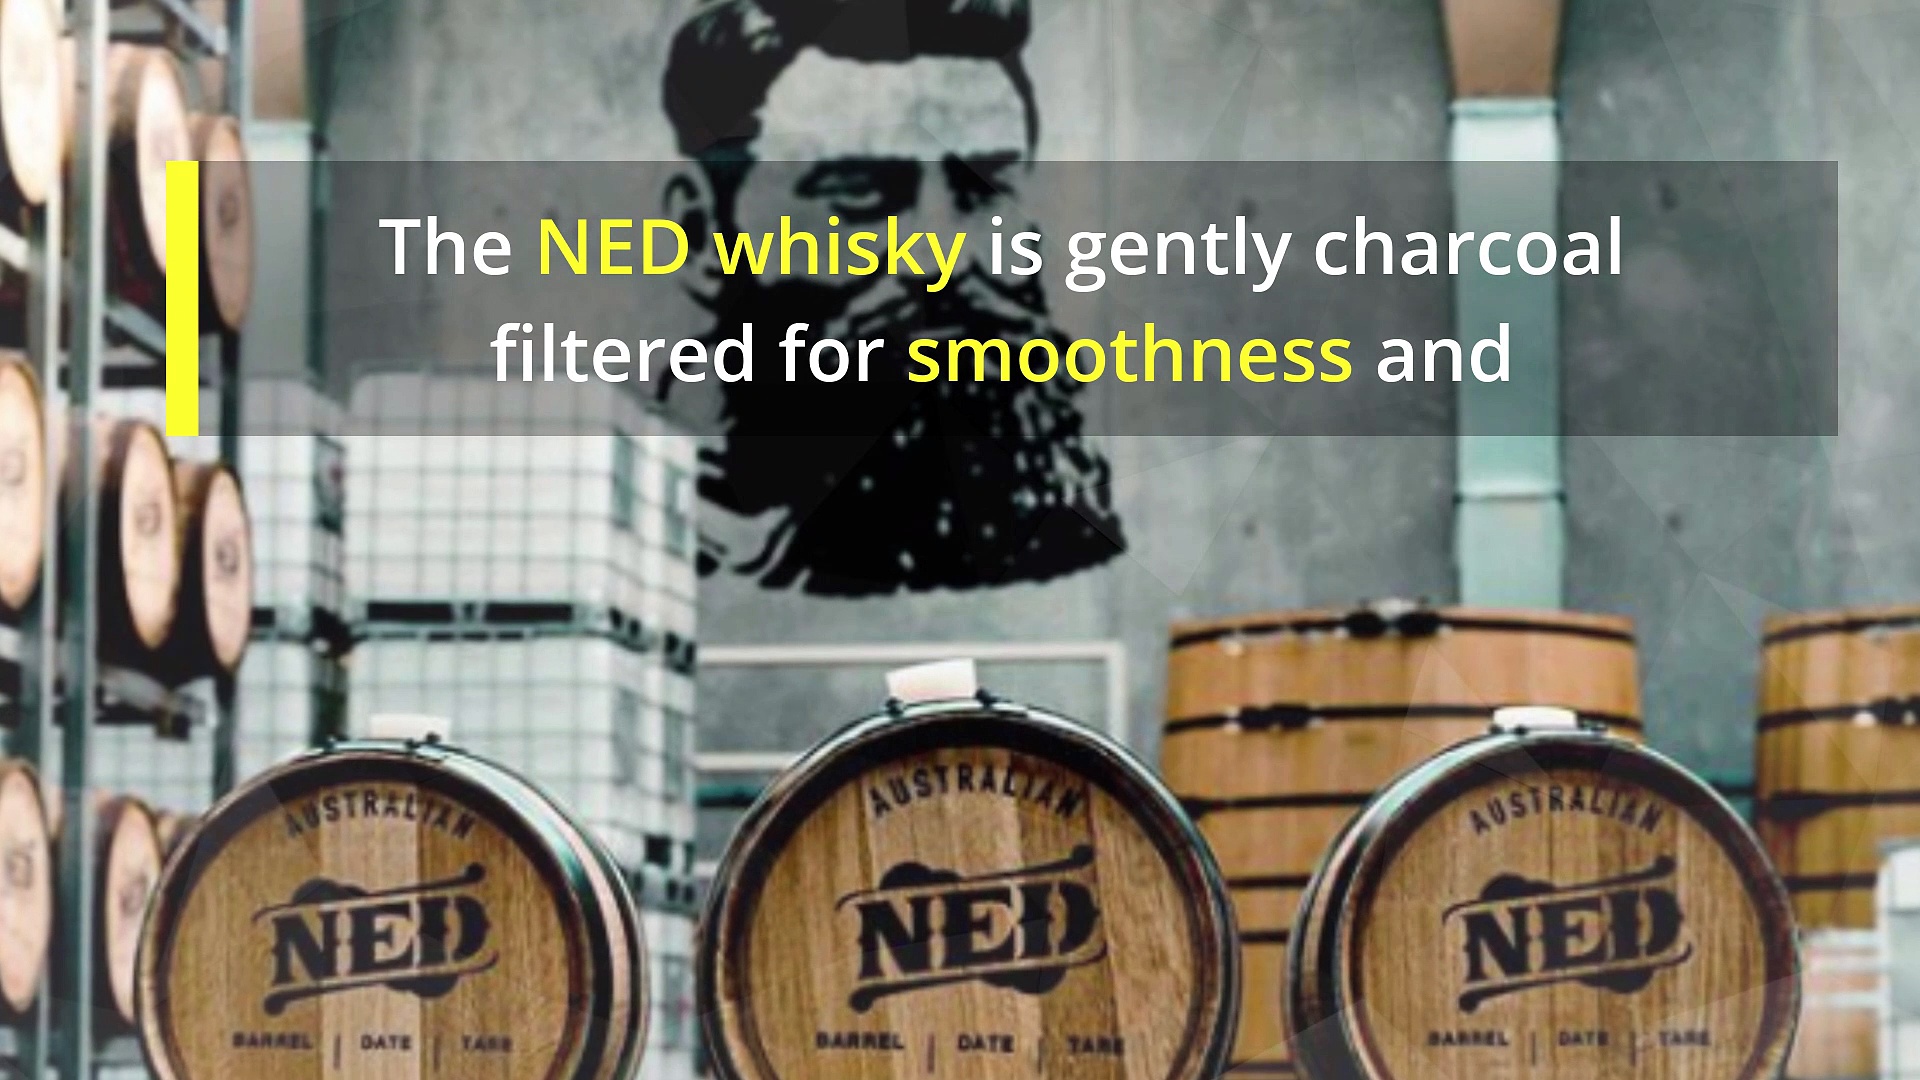 Discover Whisky in Melbourne at nedwhisky.com.au